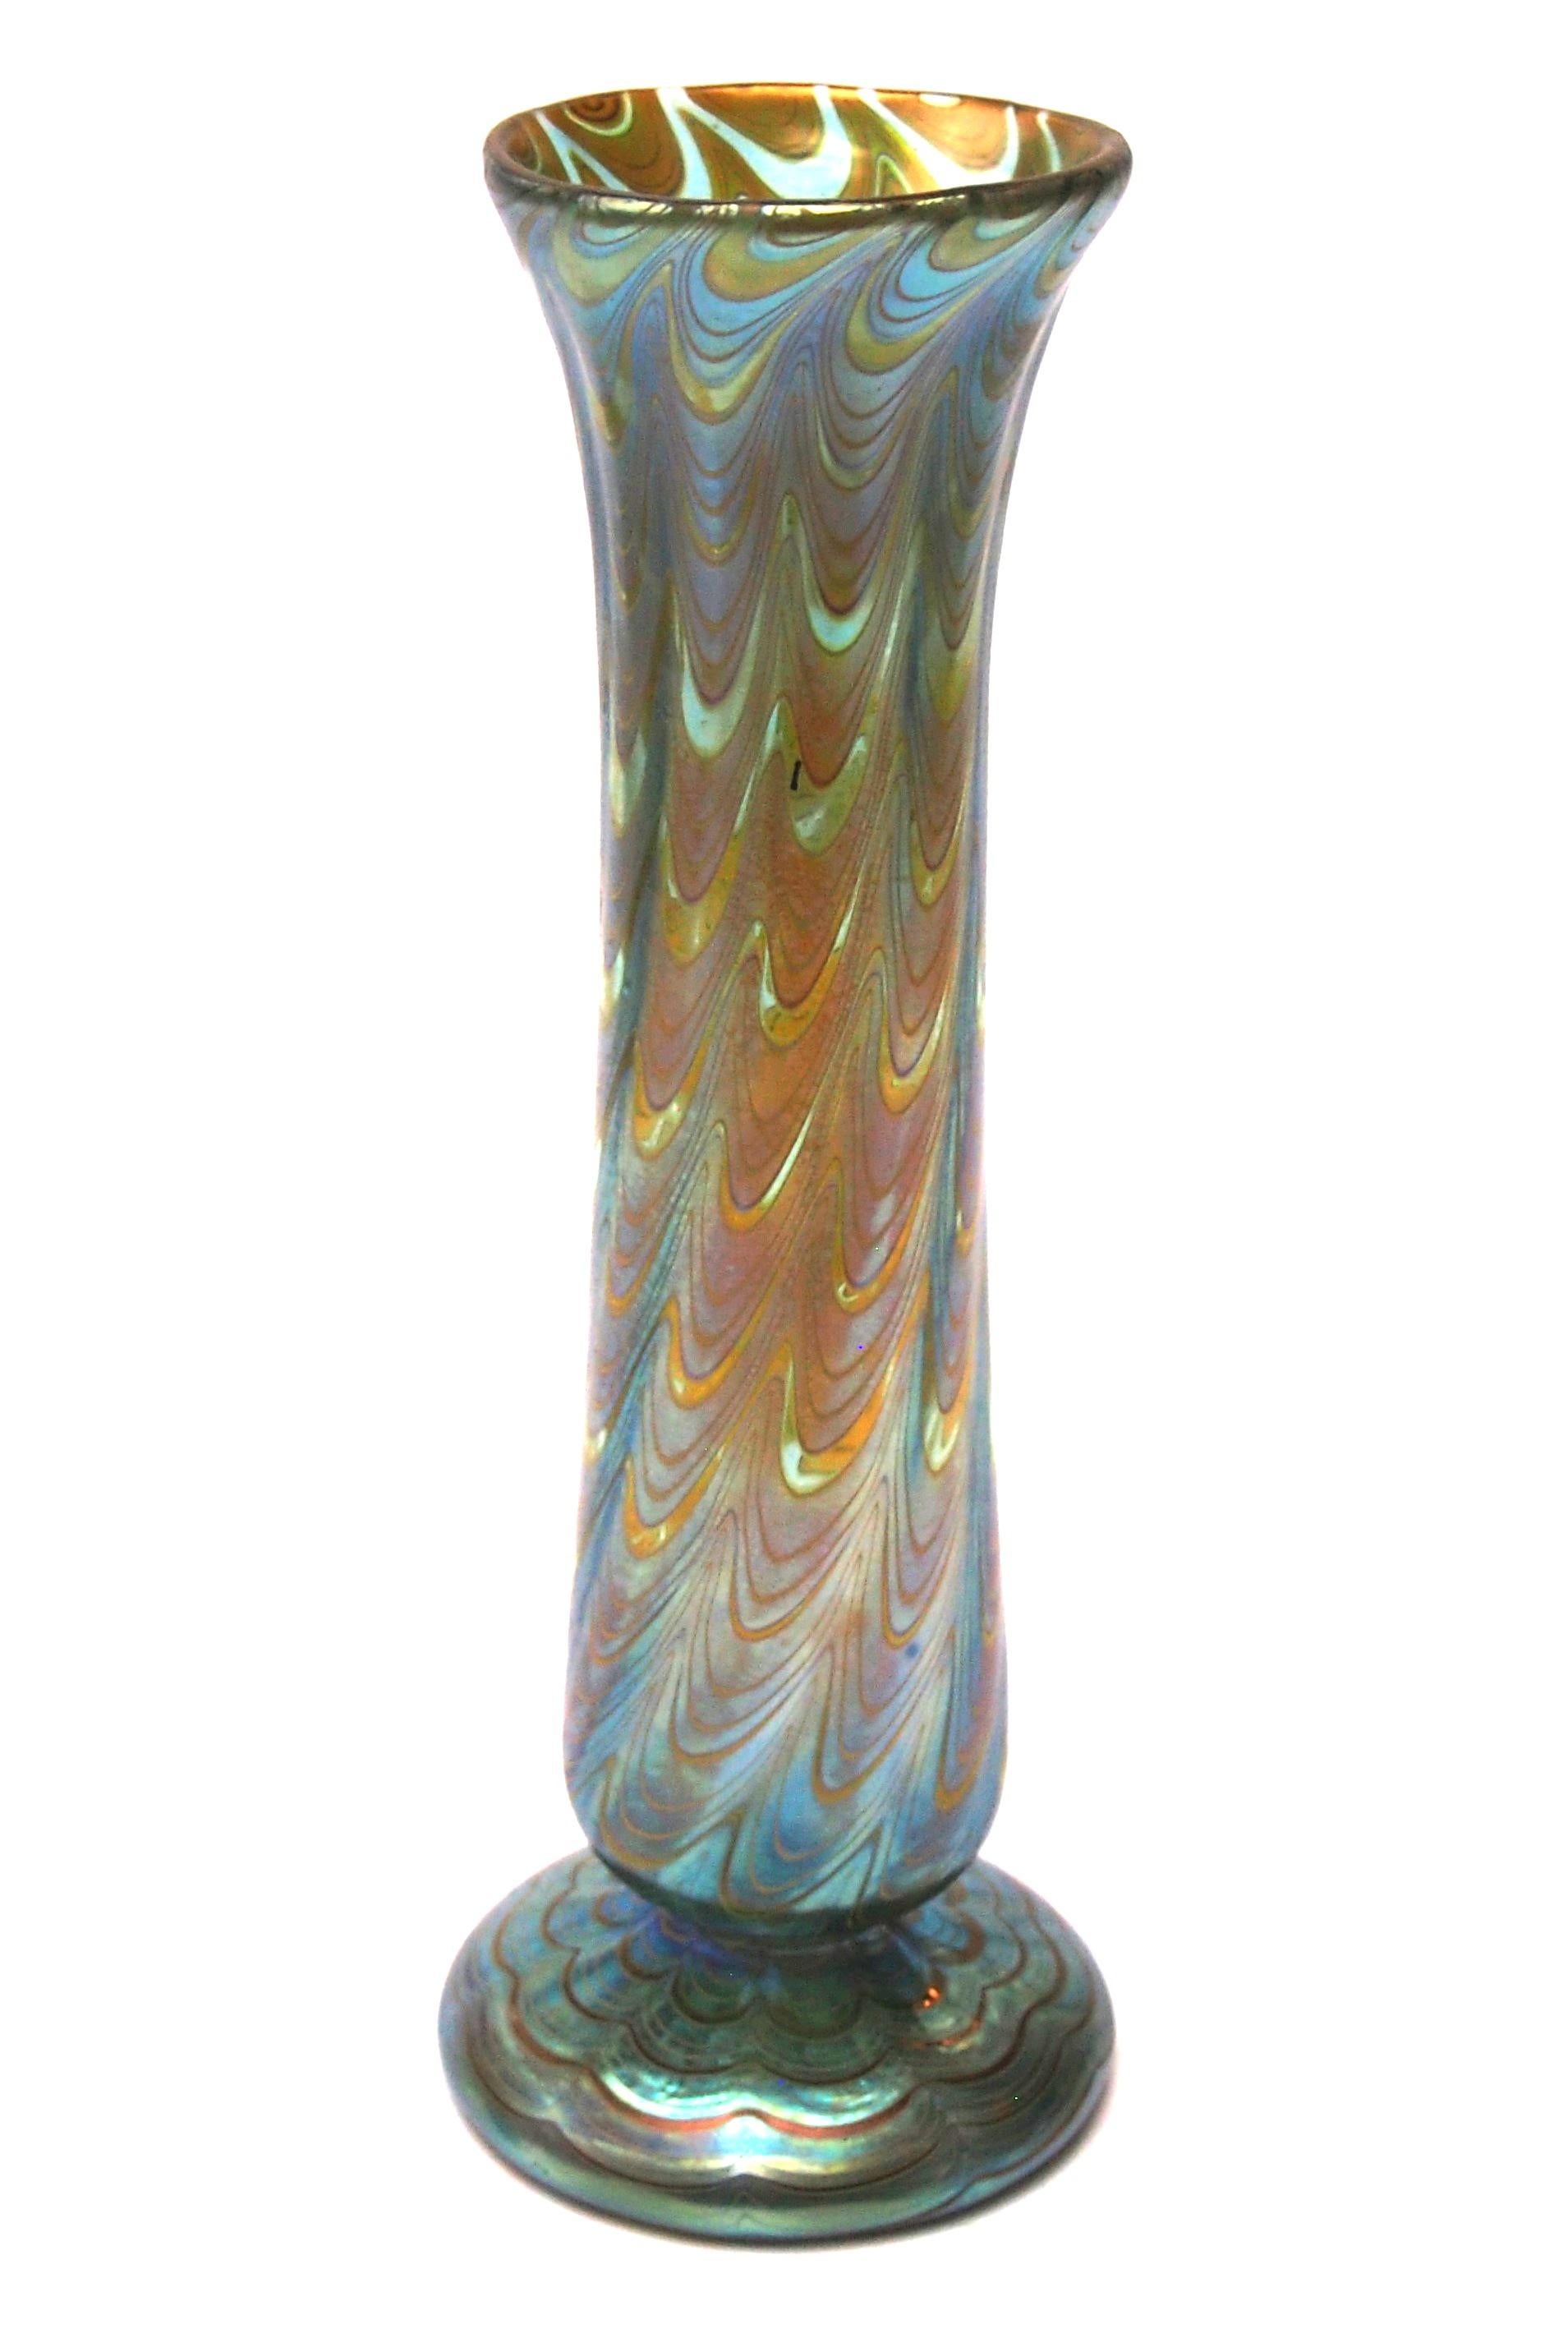 A stunning and fully documented Loetz Phaenomen Vase. This example is documented Phaenomen pattern PG 6893 and the colouring is called Mountain blue (green over a blue ground) - The pattern PG 6893  has threads that are drawn into a wave pattern in